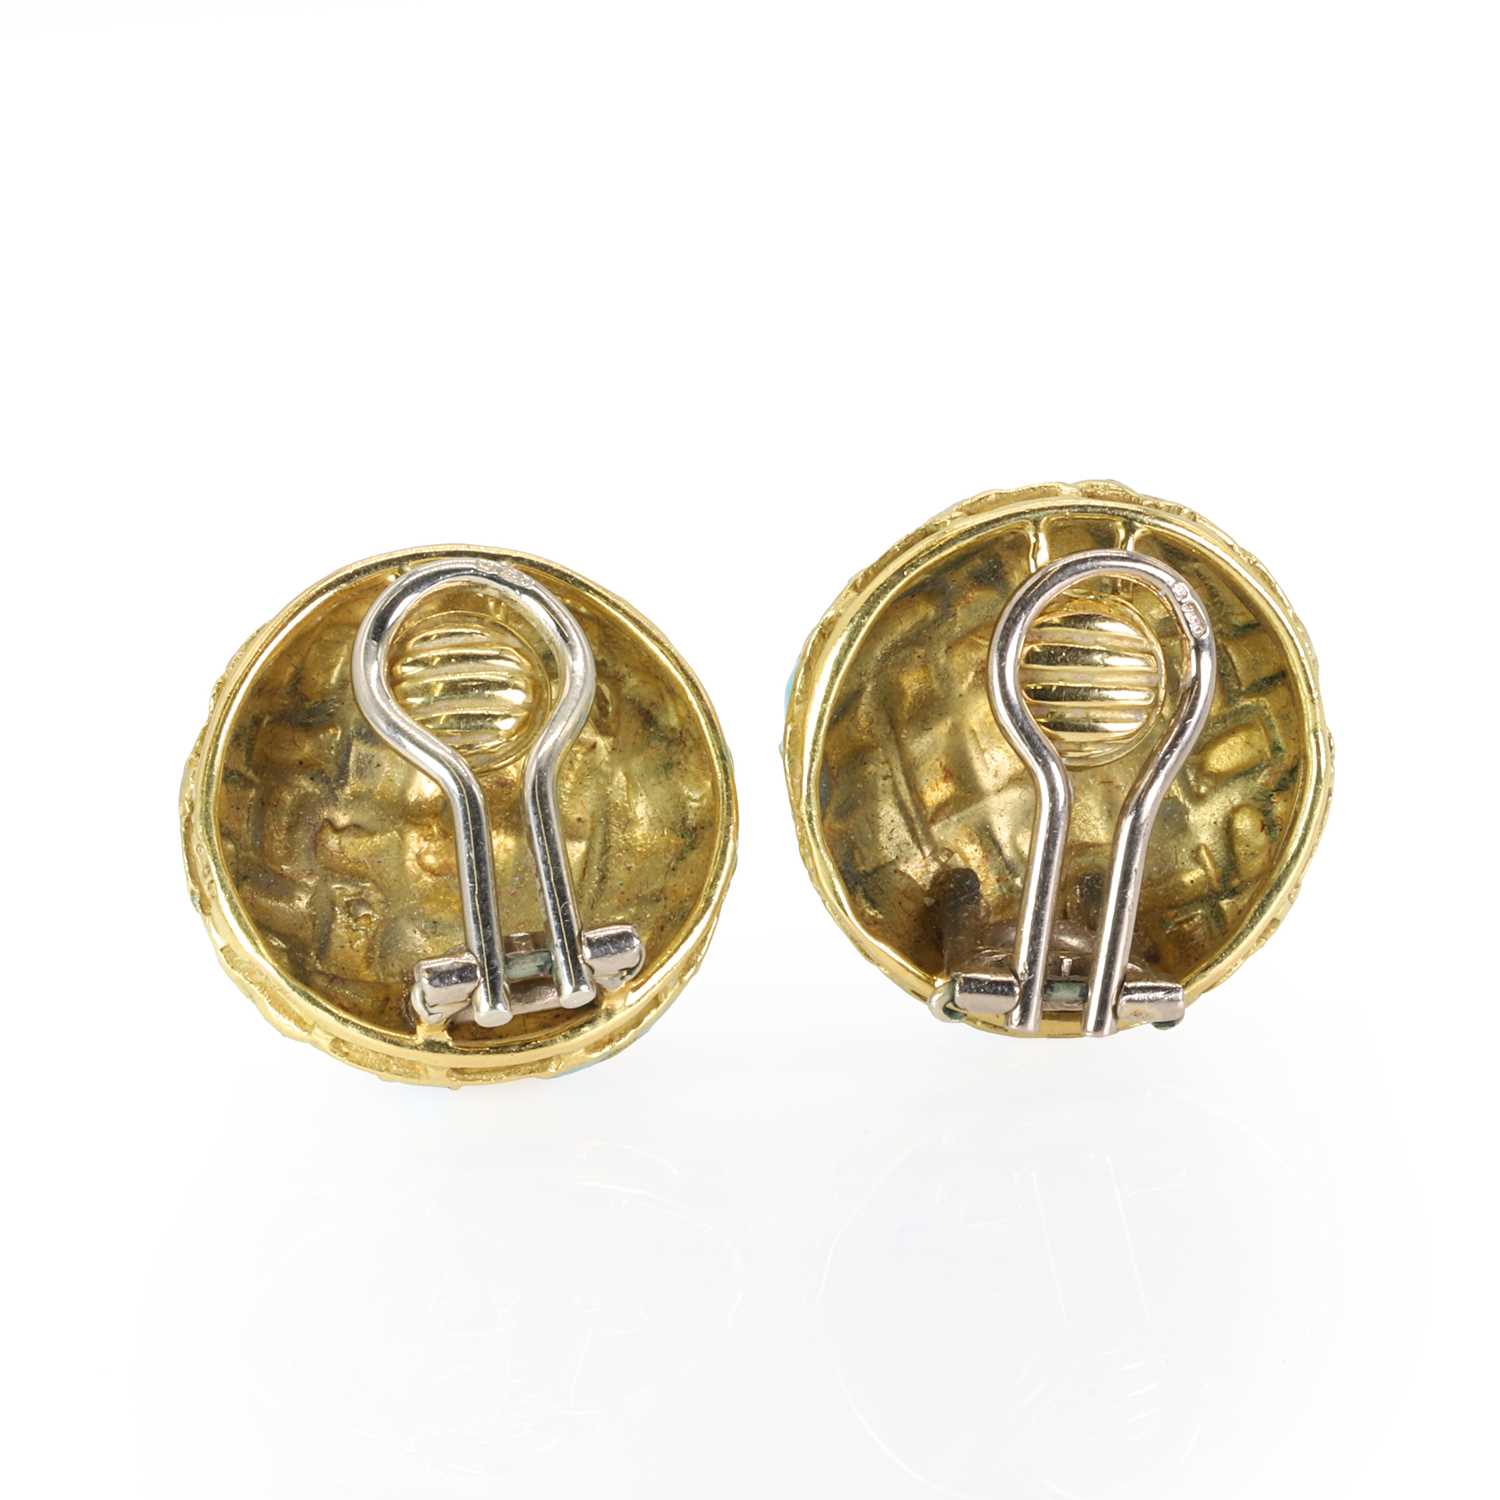 A boxed pair of 18ct gold and enamel clip earrings, by John Donald, - Image 2 of 3